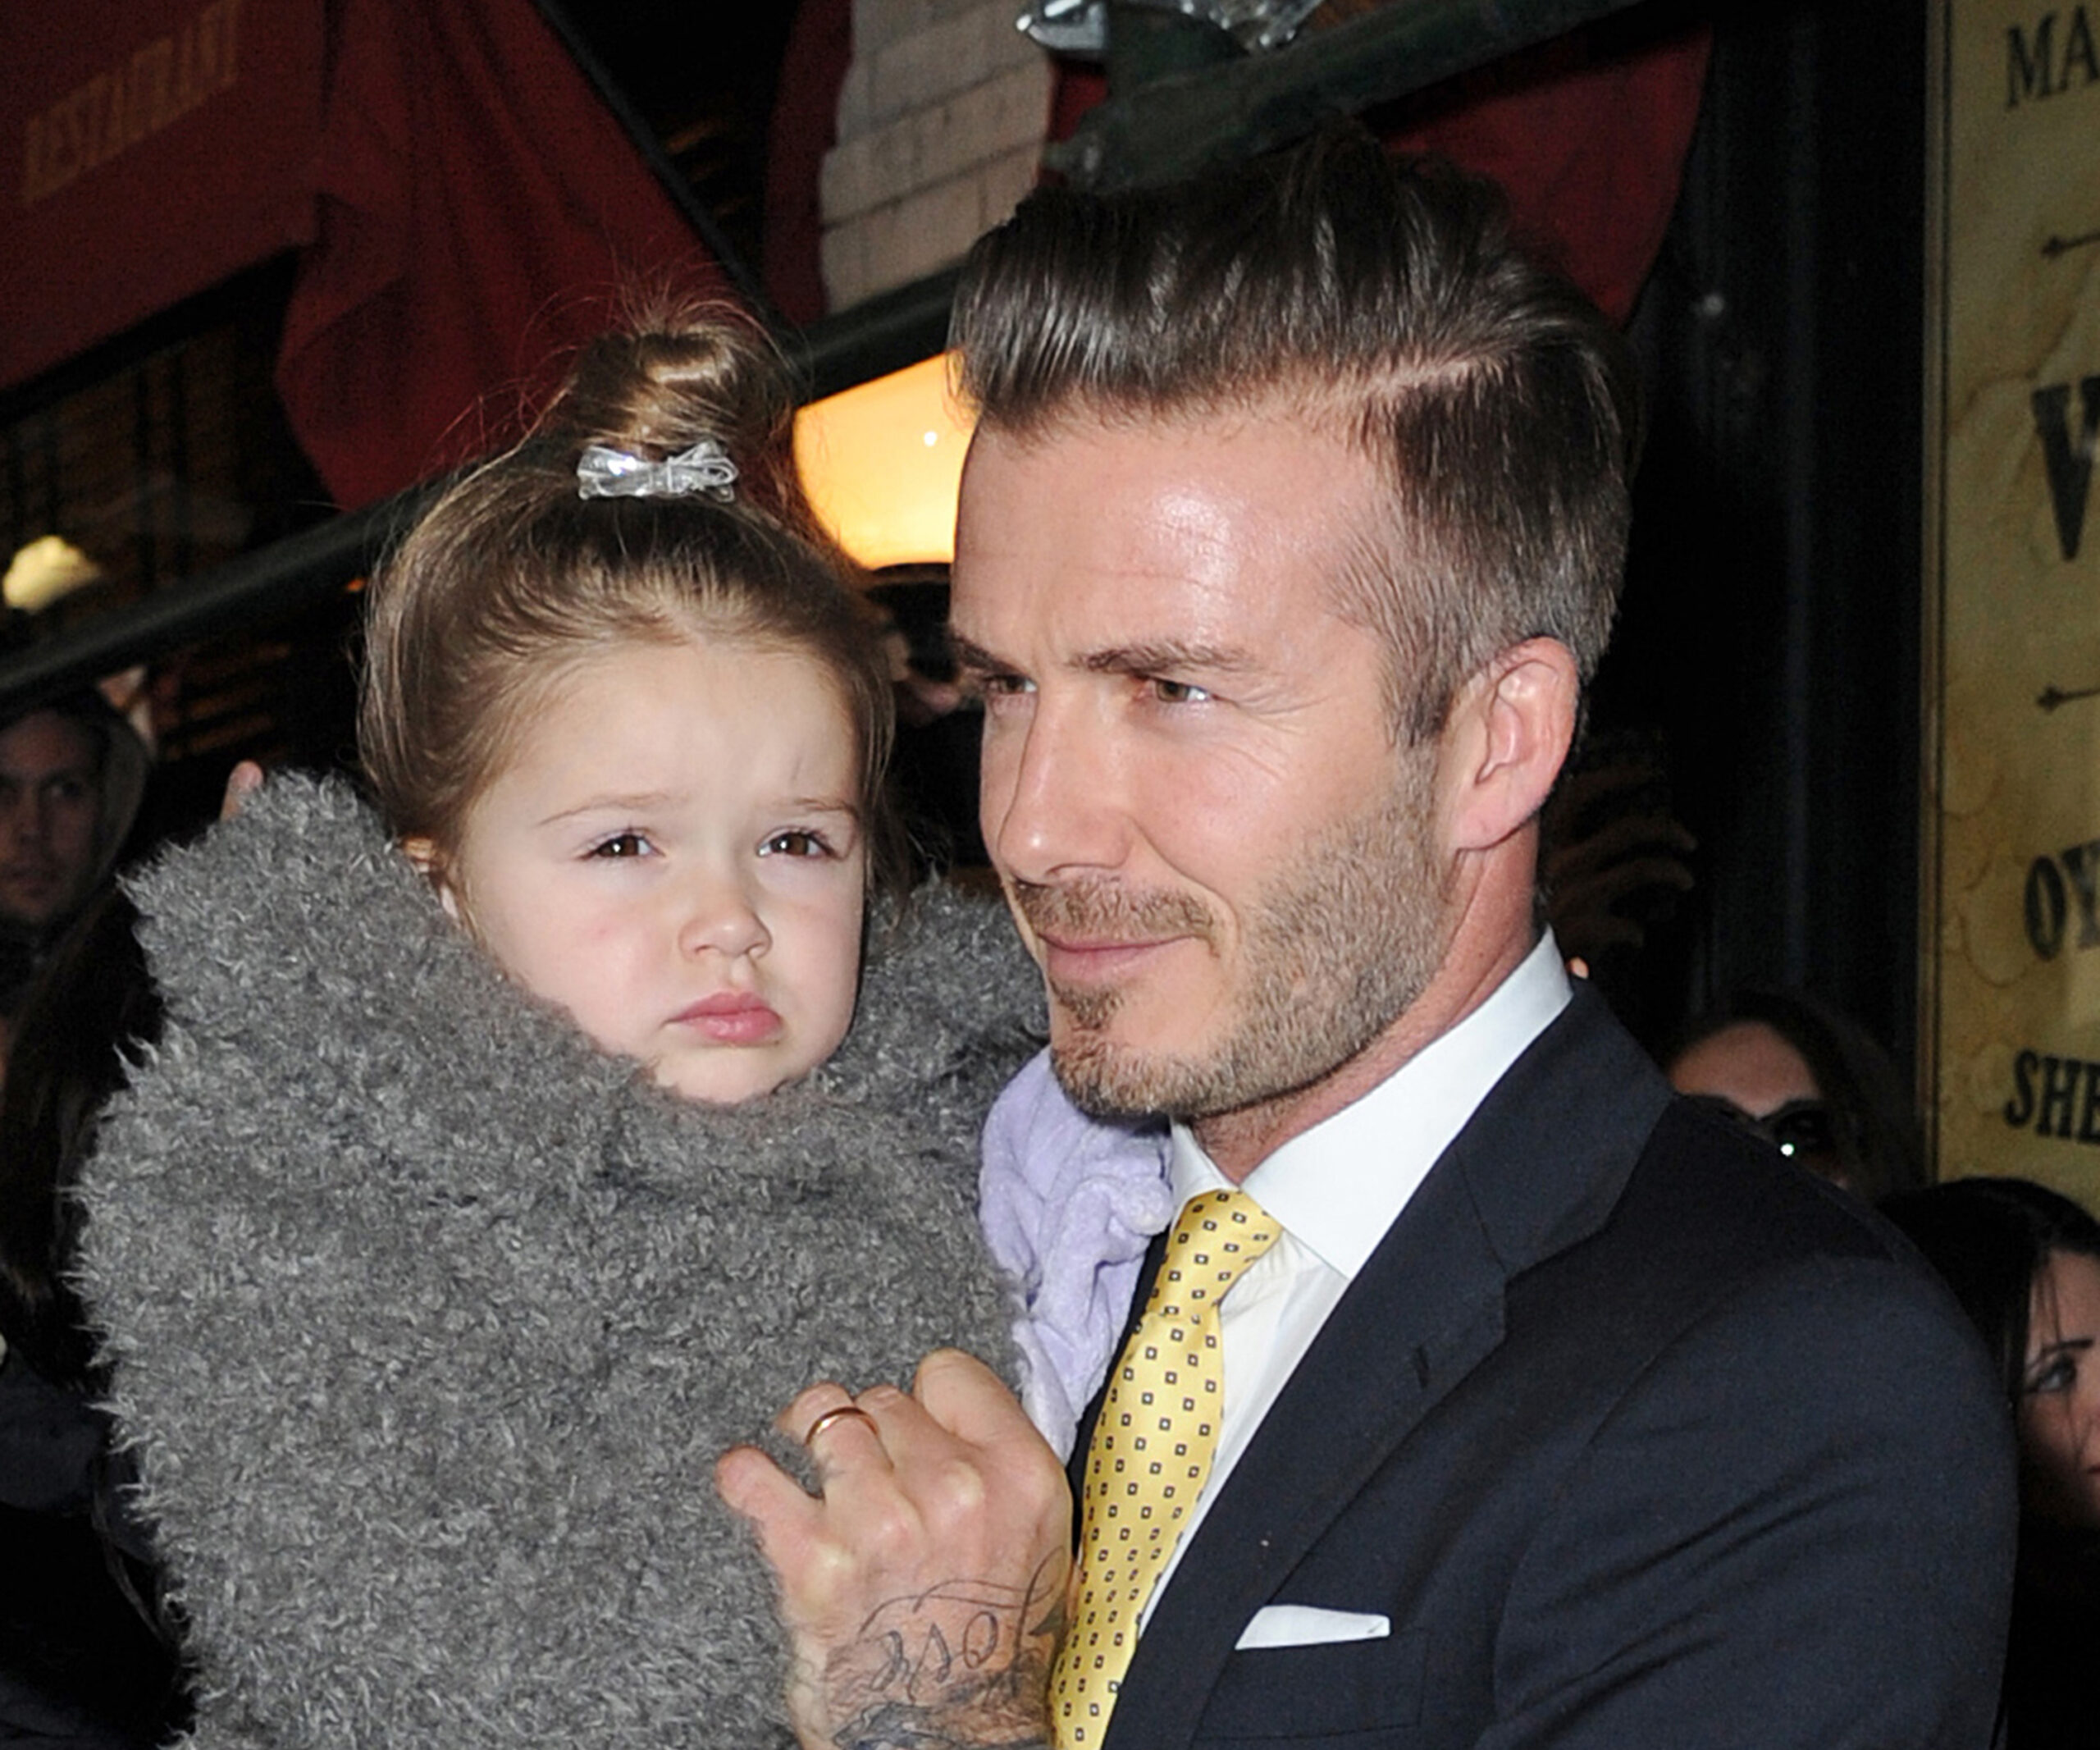 David Beckham is this year’s Sexiest Man Alive